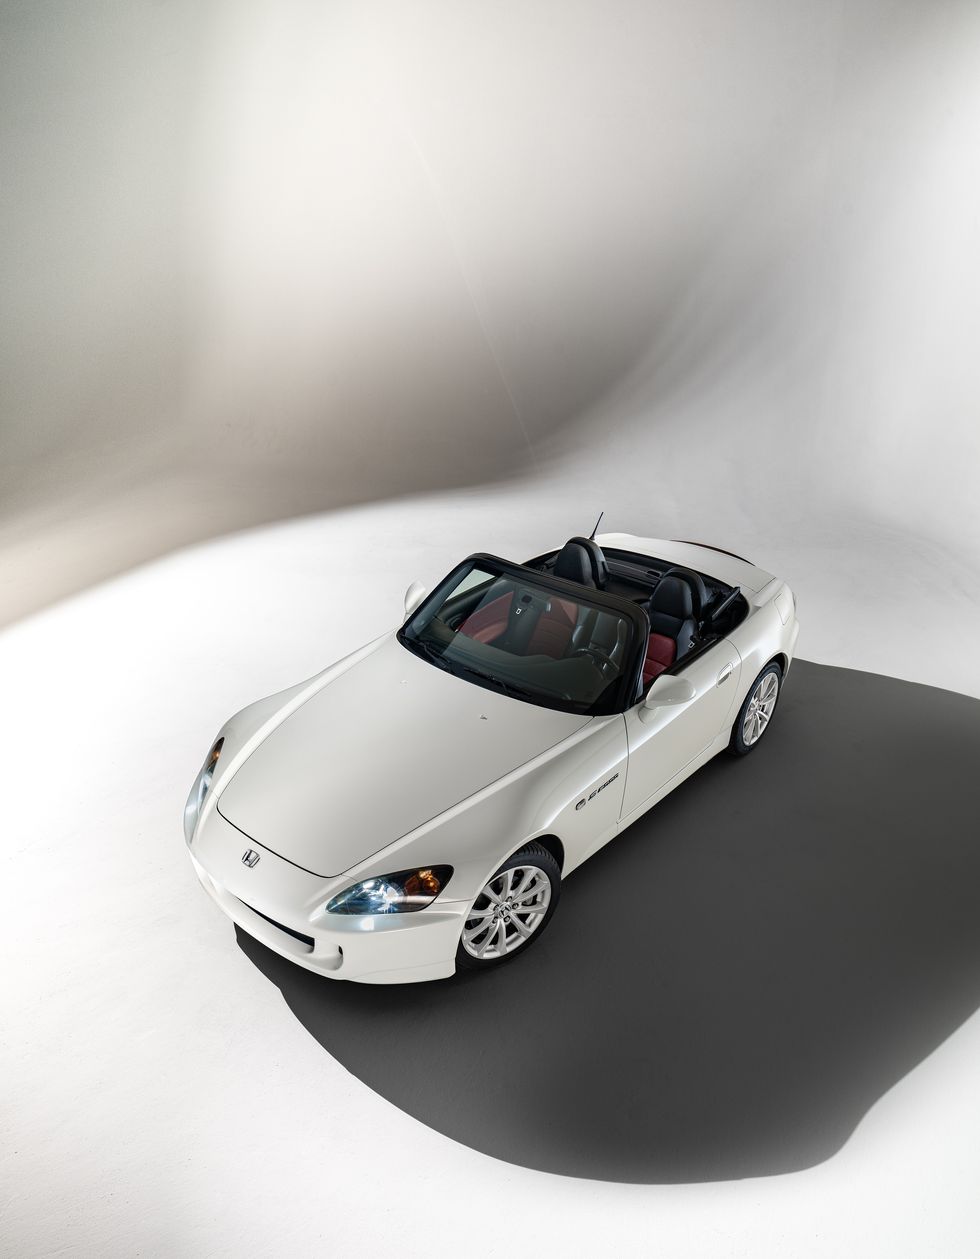 12 Things You Should Know Before Buying A Honda S2000